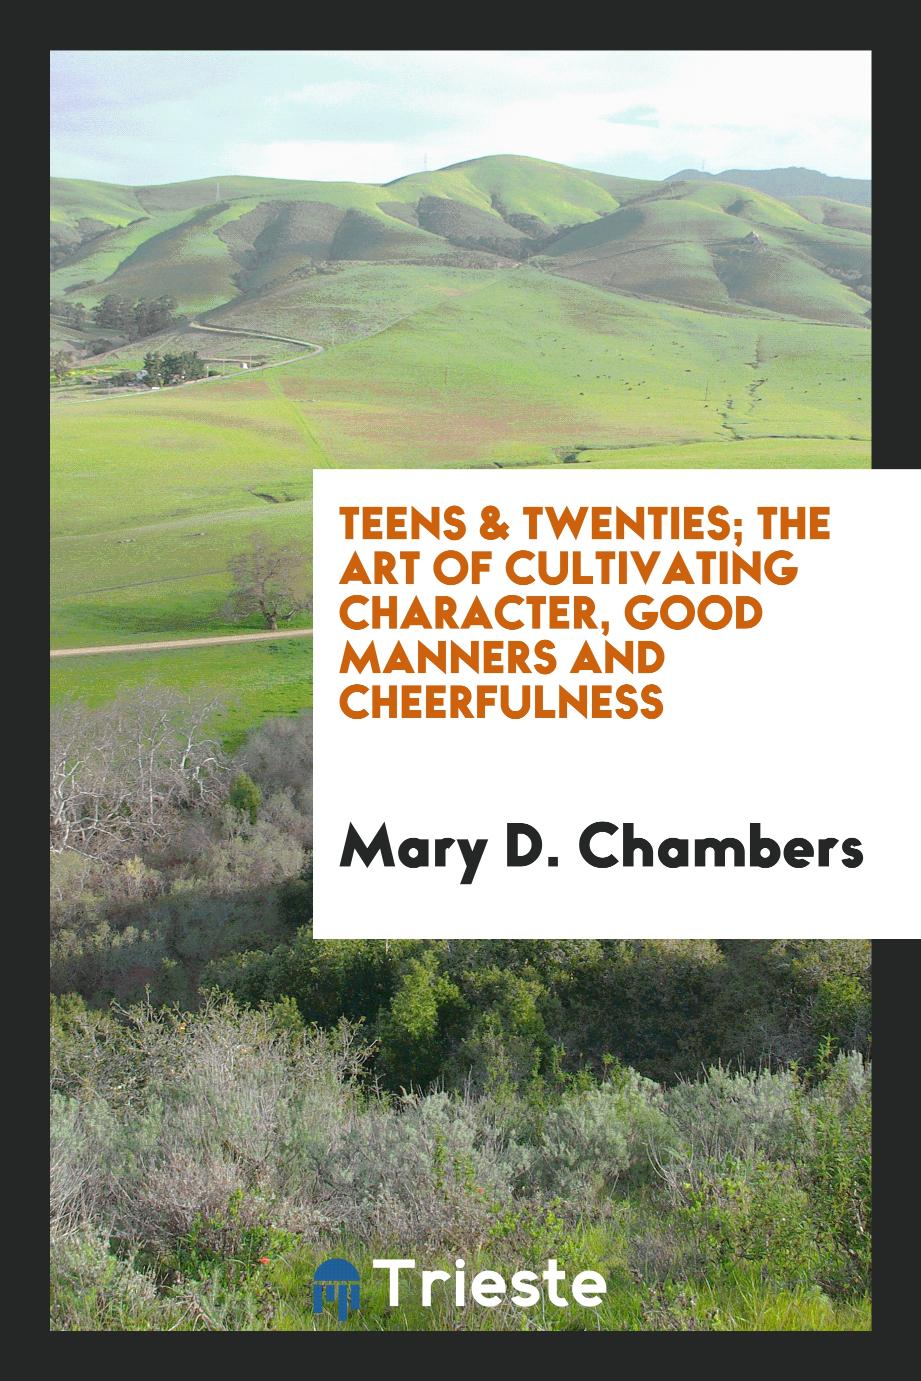 Teens & twenties; The art of cultivating character, good manners and cheerfulness